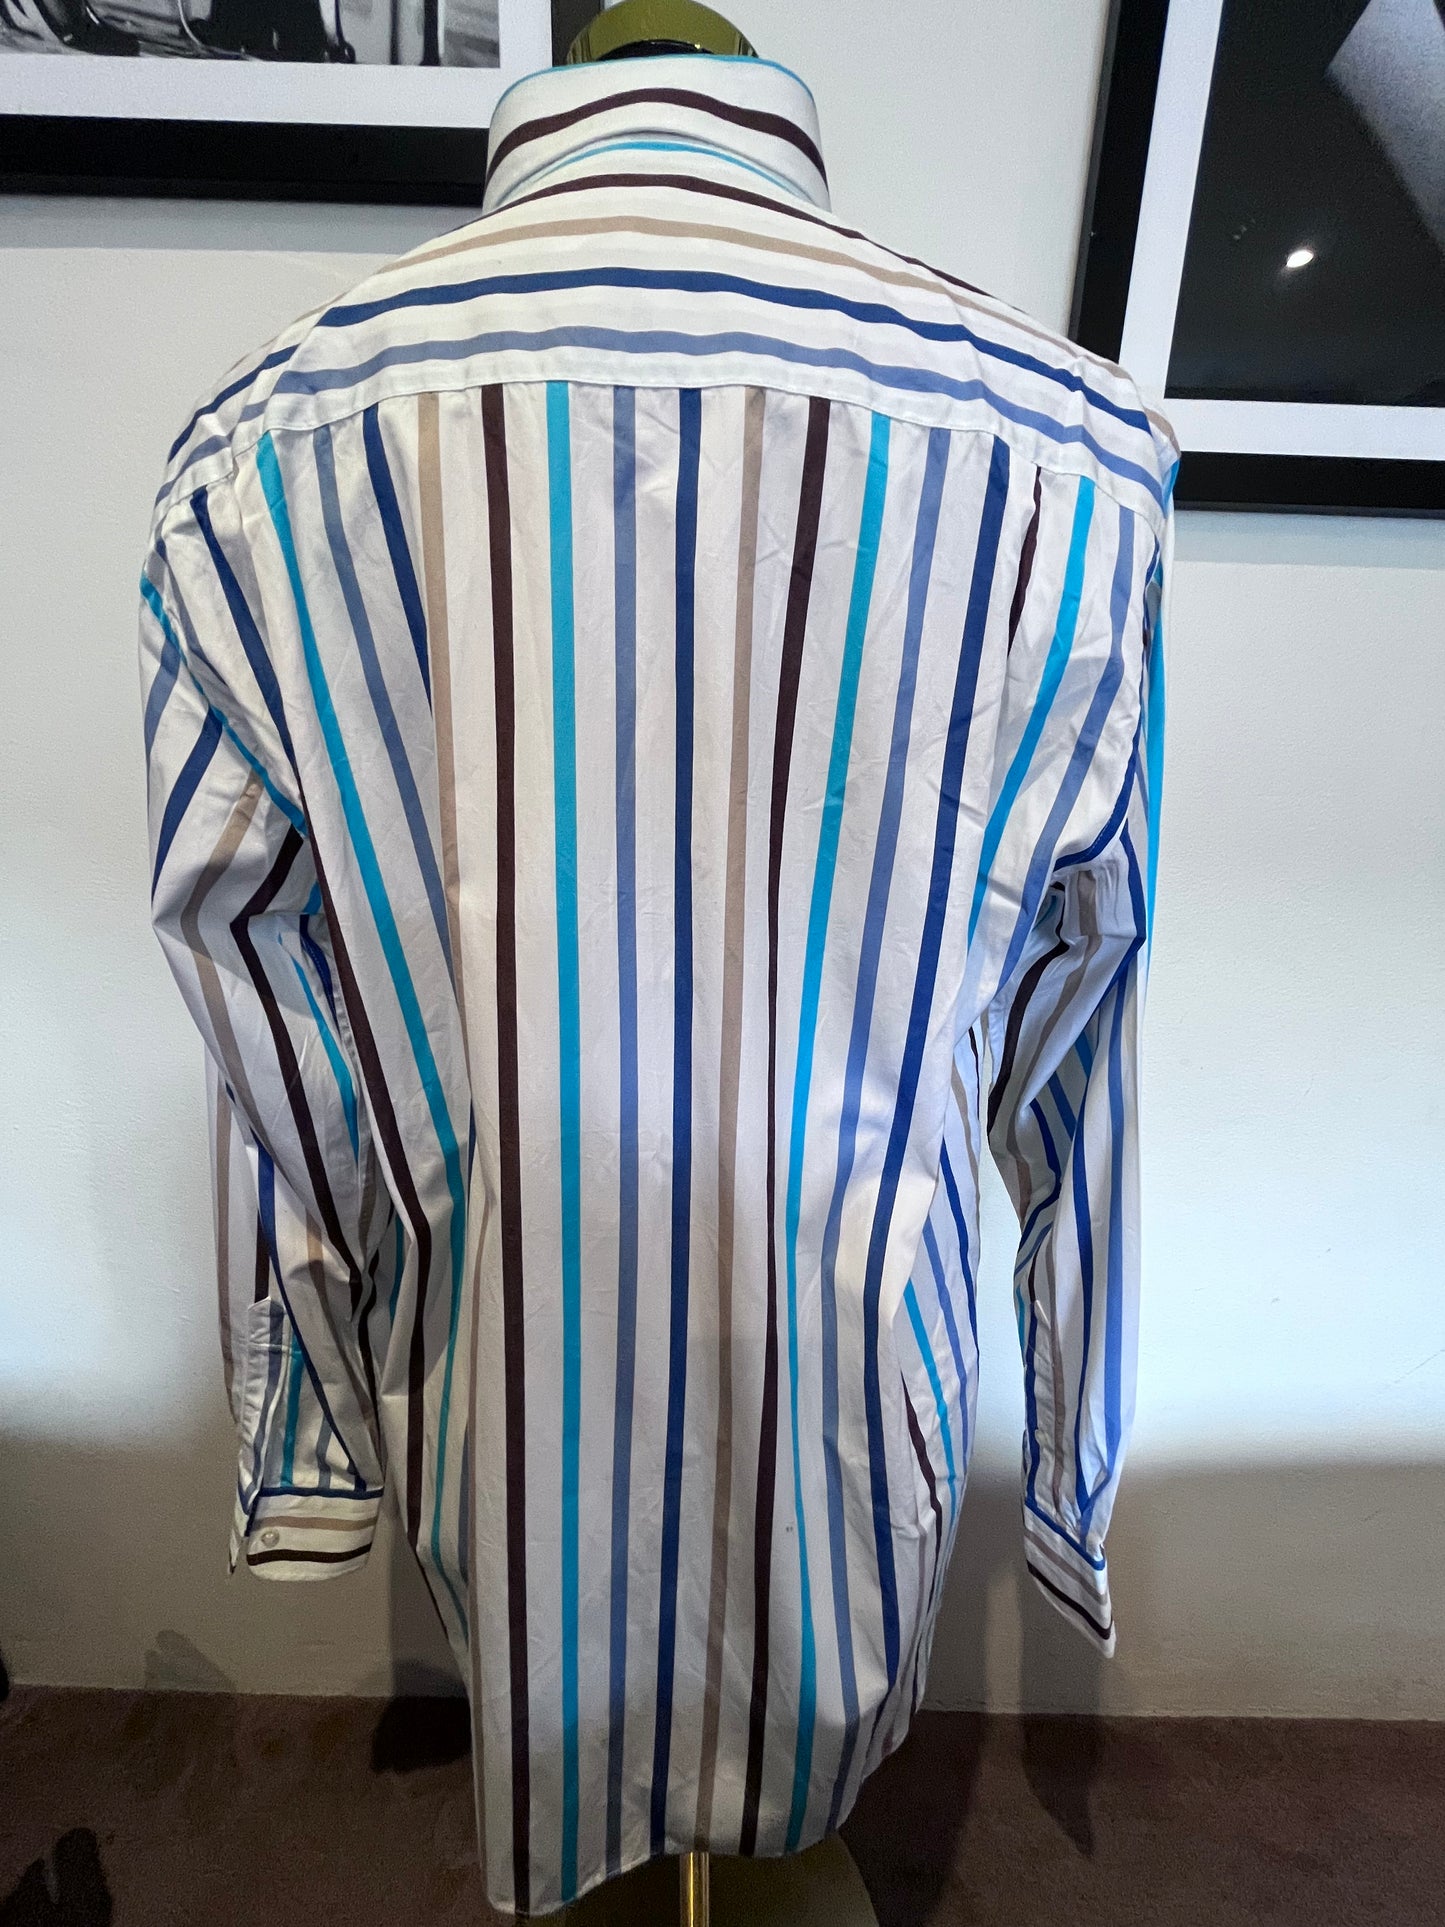 Paul & Shark 100% Cotton White Blue Striped Shirt Size Large Made In Italy Button Down Collar